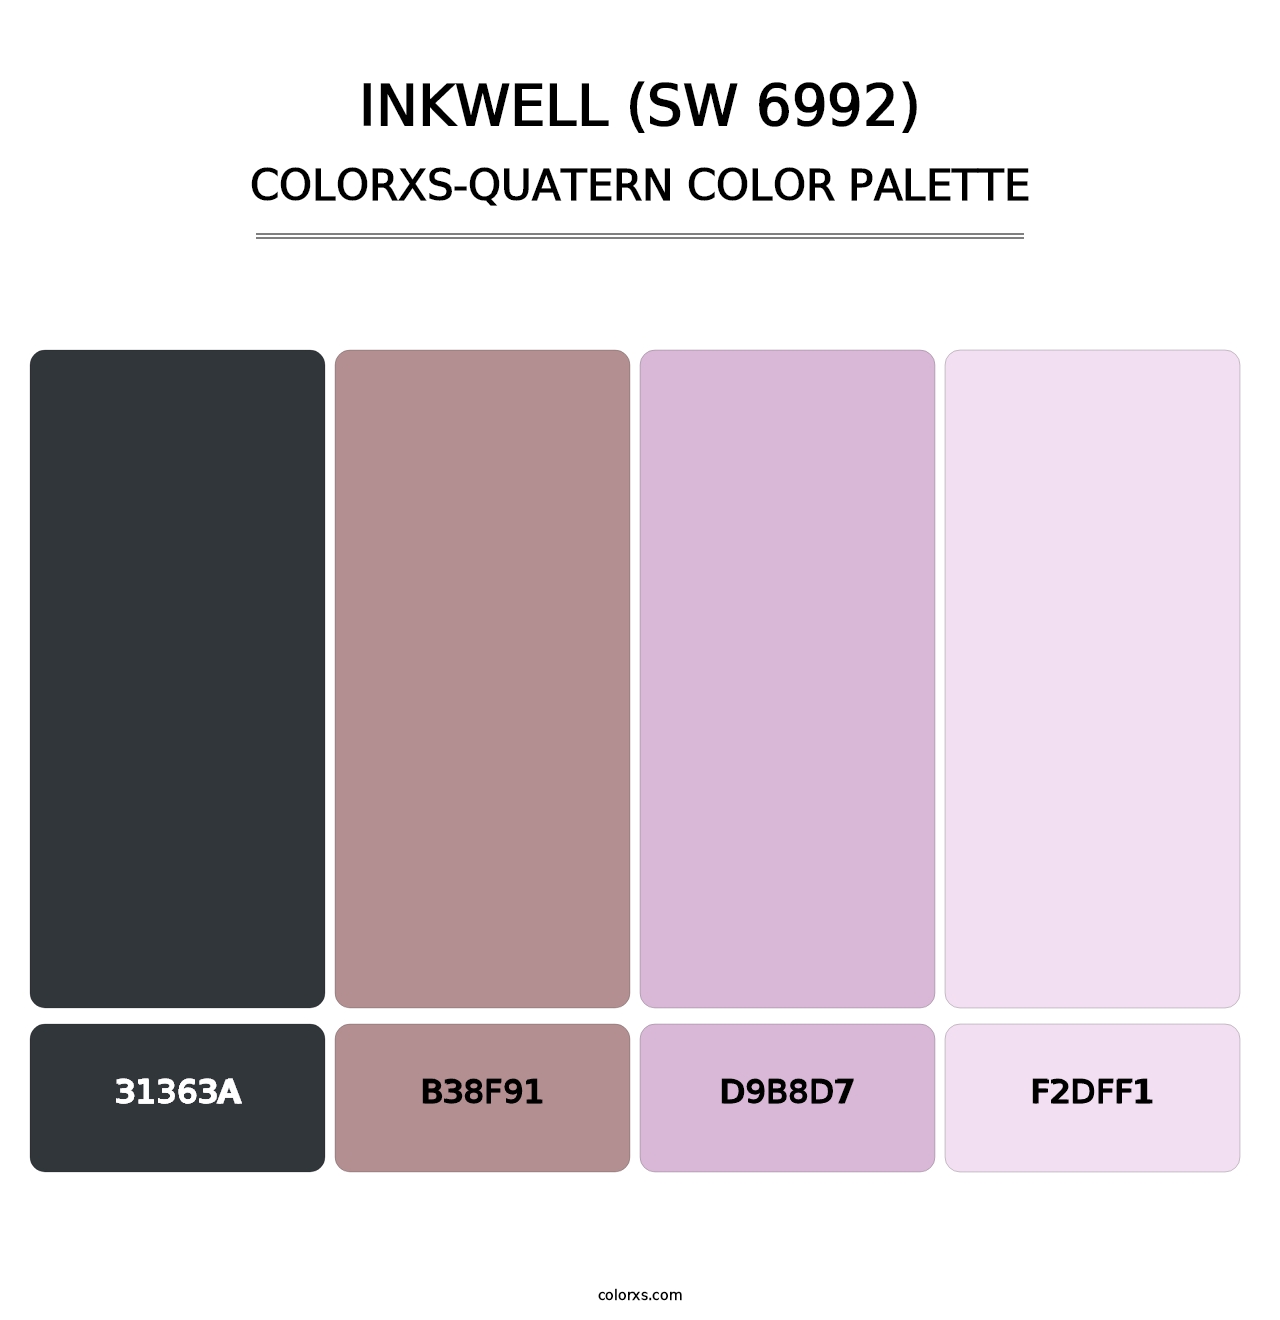 Inkwell (SW 6992) - Colorxs Quatern Palette